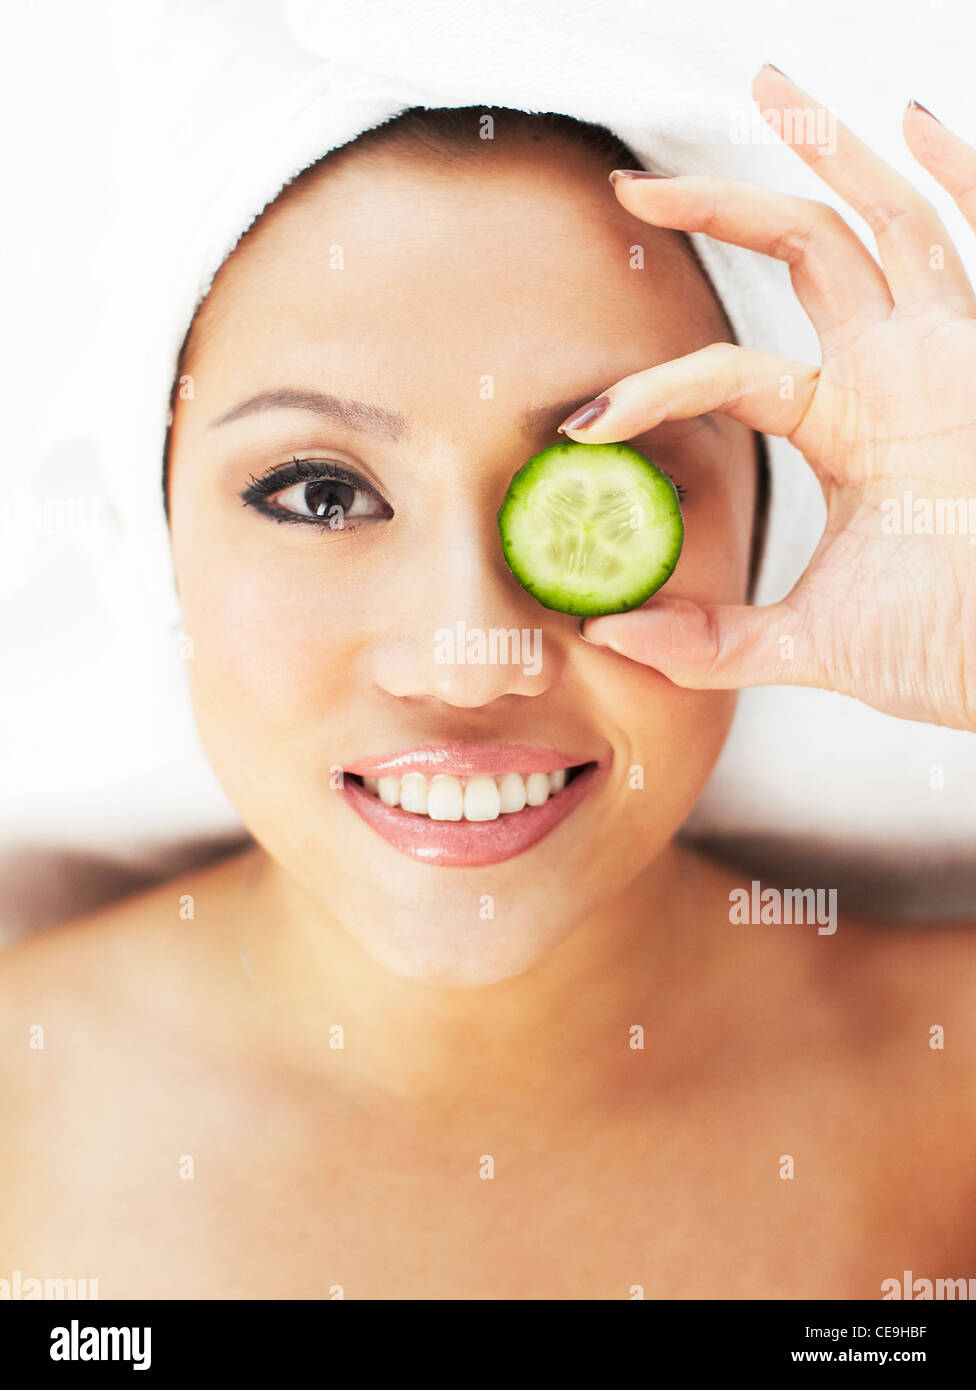 Woman with cucumber over her eyes Stock Photo